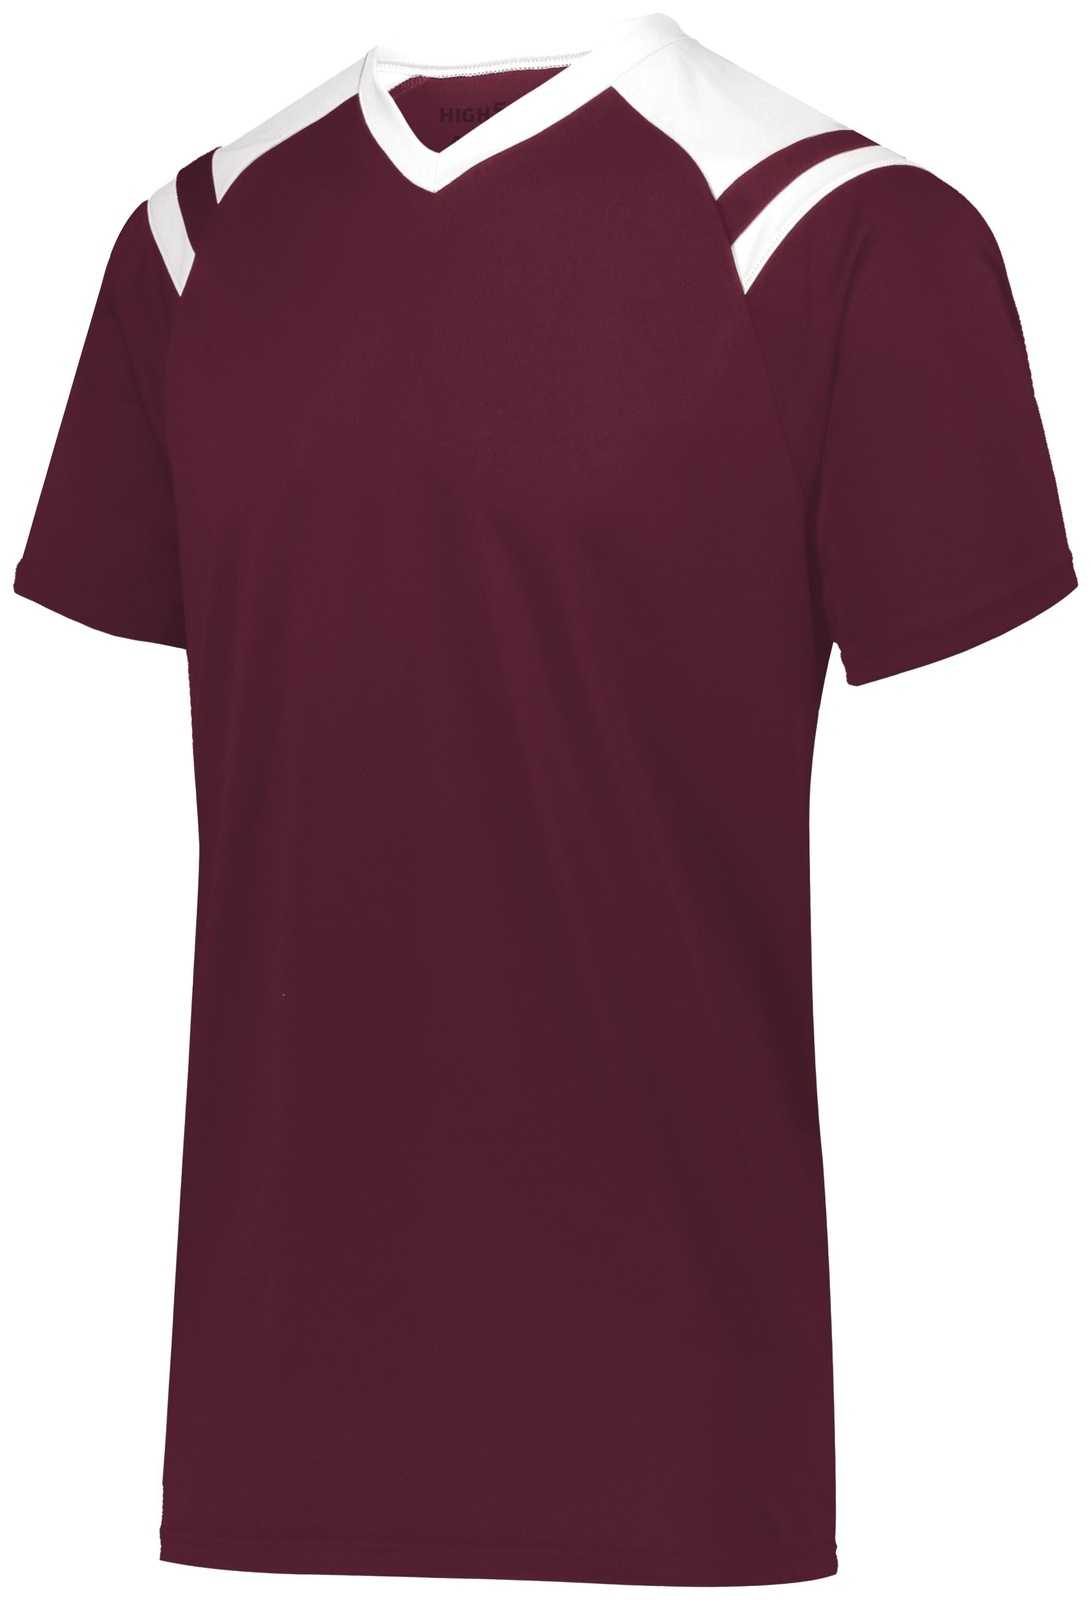 High Five 322970 Sheffield Jersey - Maroon White - HIT a Double